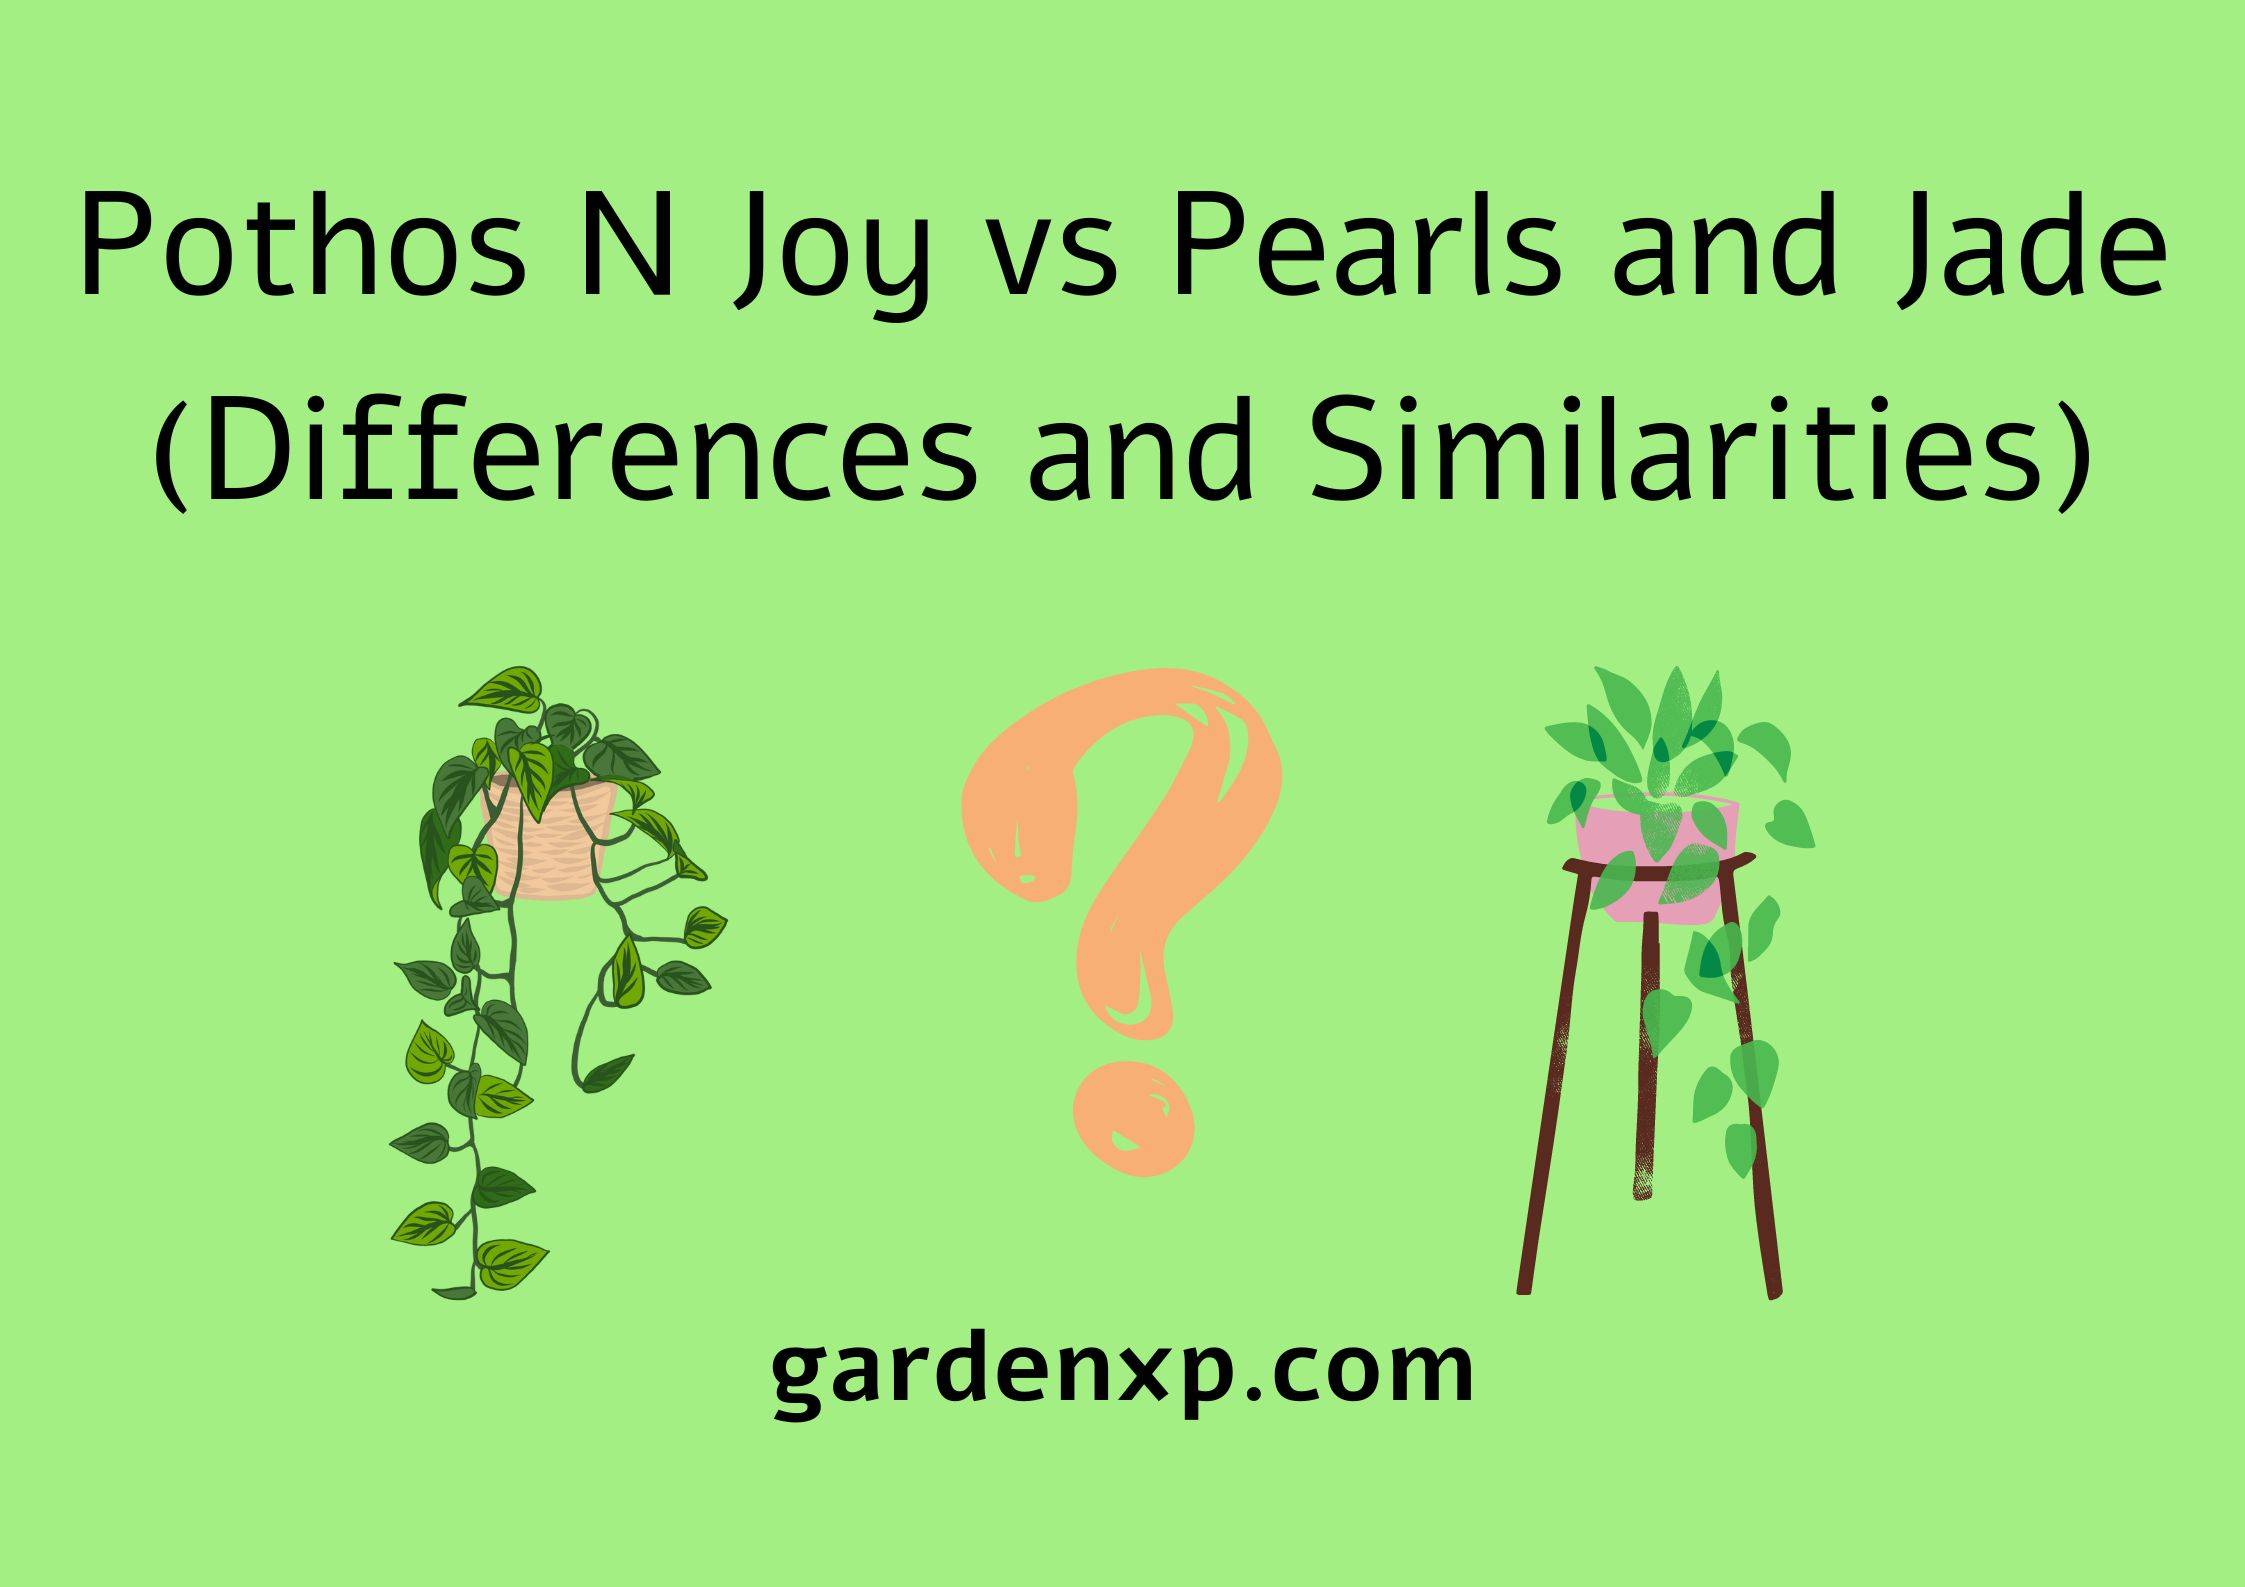 Pothos N Joy vs Pearls and Jade (Differences and Similarities)